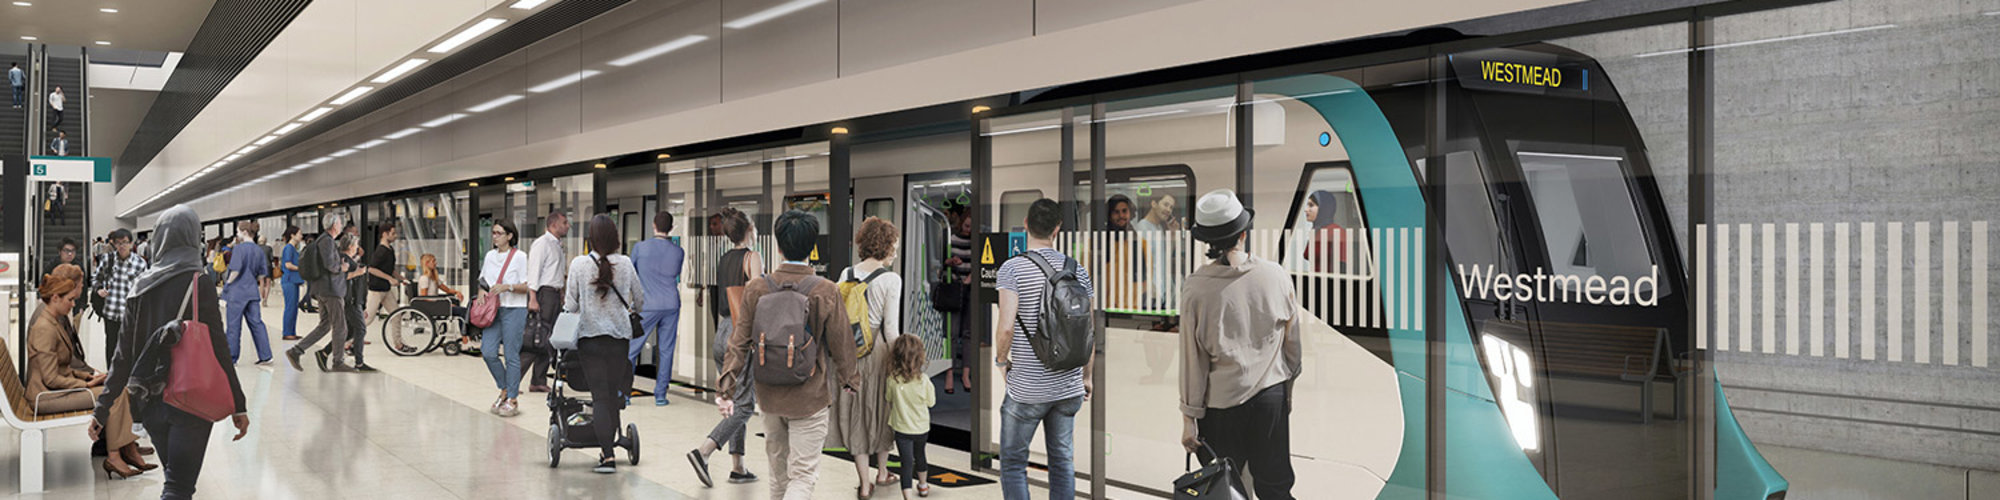 An artist's impression of the future metro station at Westmead as viewed from the platform, being delivered as part of the Sydney Metro West project.